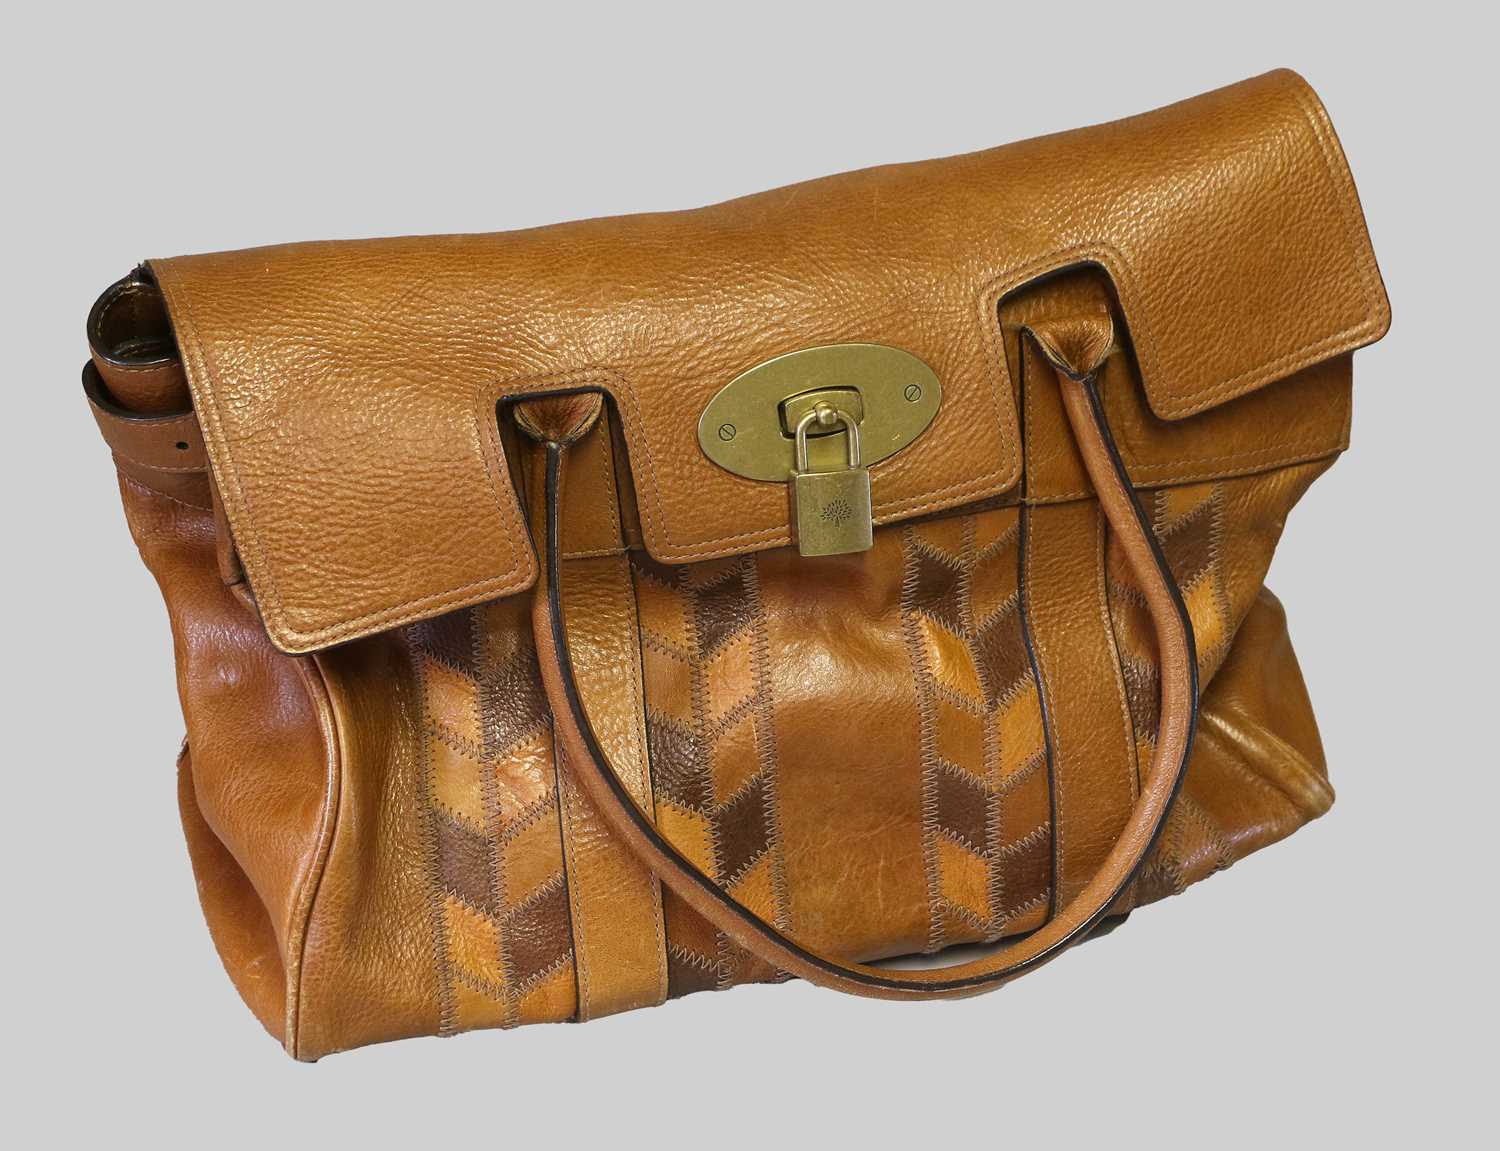 Mulberry Tan Leather Bayswater Rio Patchwork Bag with brass hardware, adjustable tabs and buckles, - Image 11 of 11